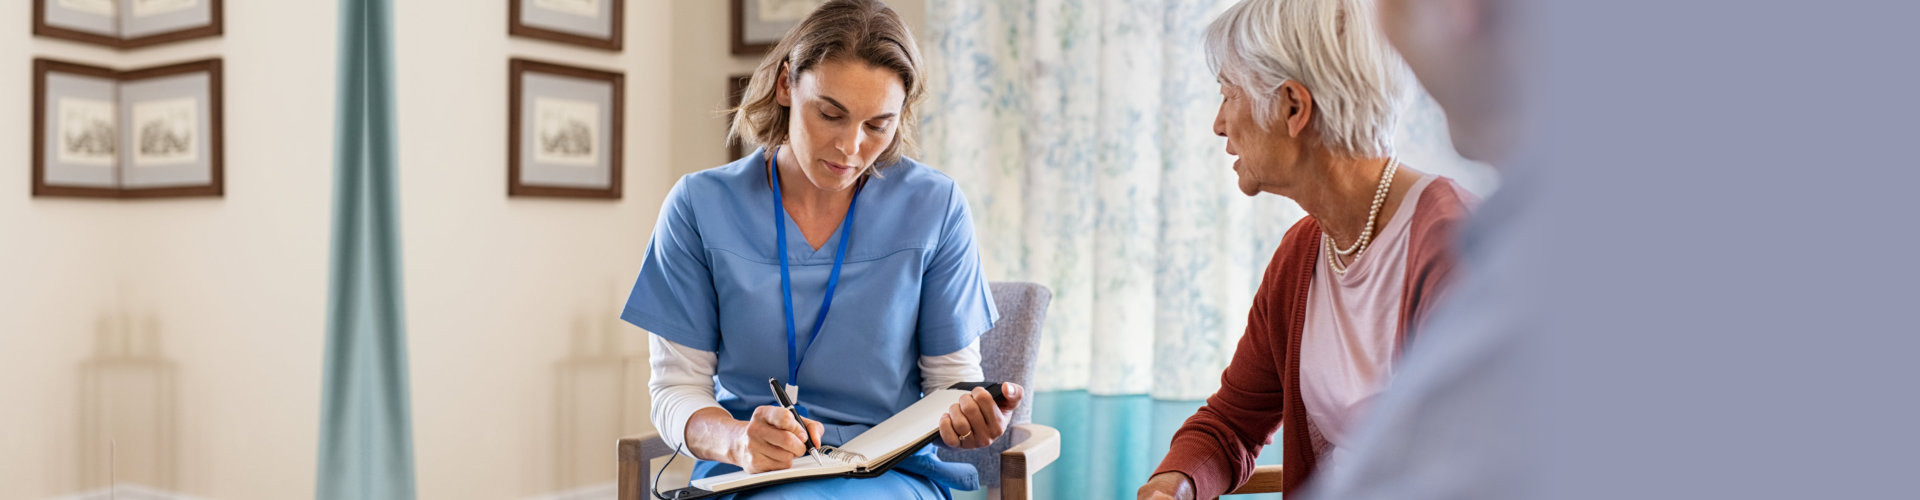 Nurse talking to old patients while being in a nursing home. Young healthcare worker visiting senior couple at care centre and writing information. Nurse wearing uniform noting symptoms of elderly woman